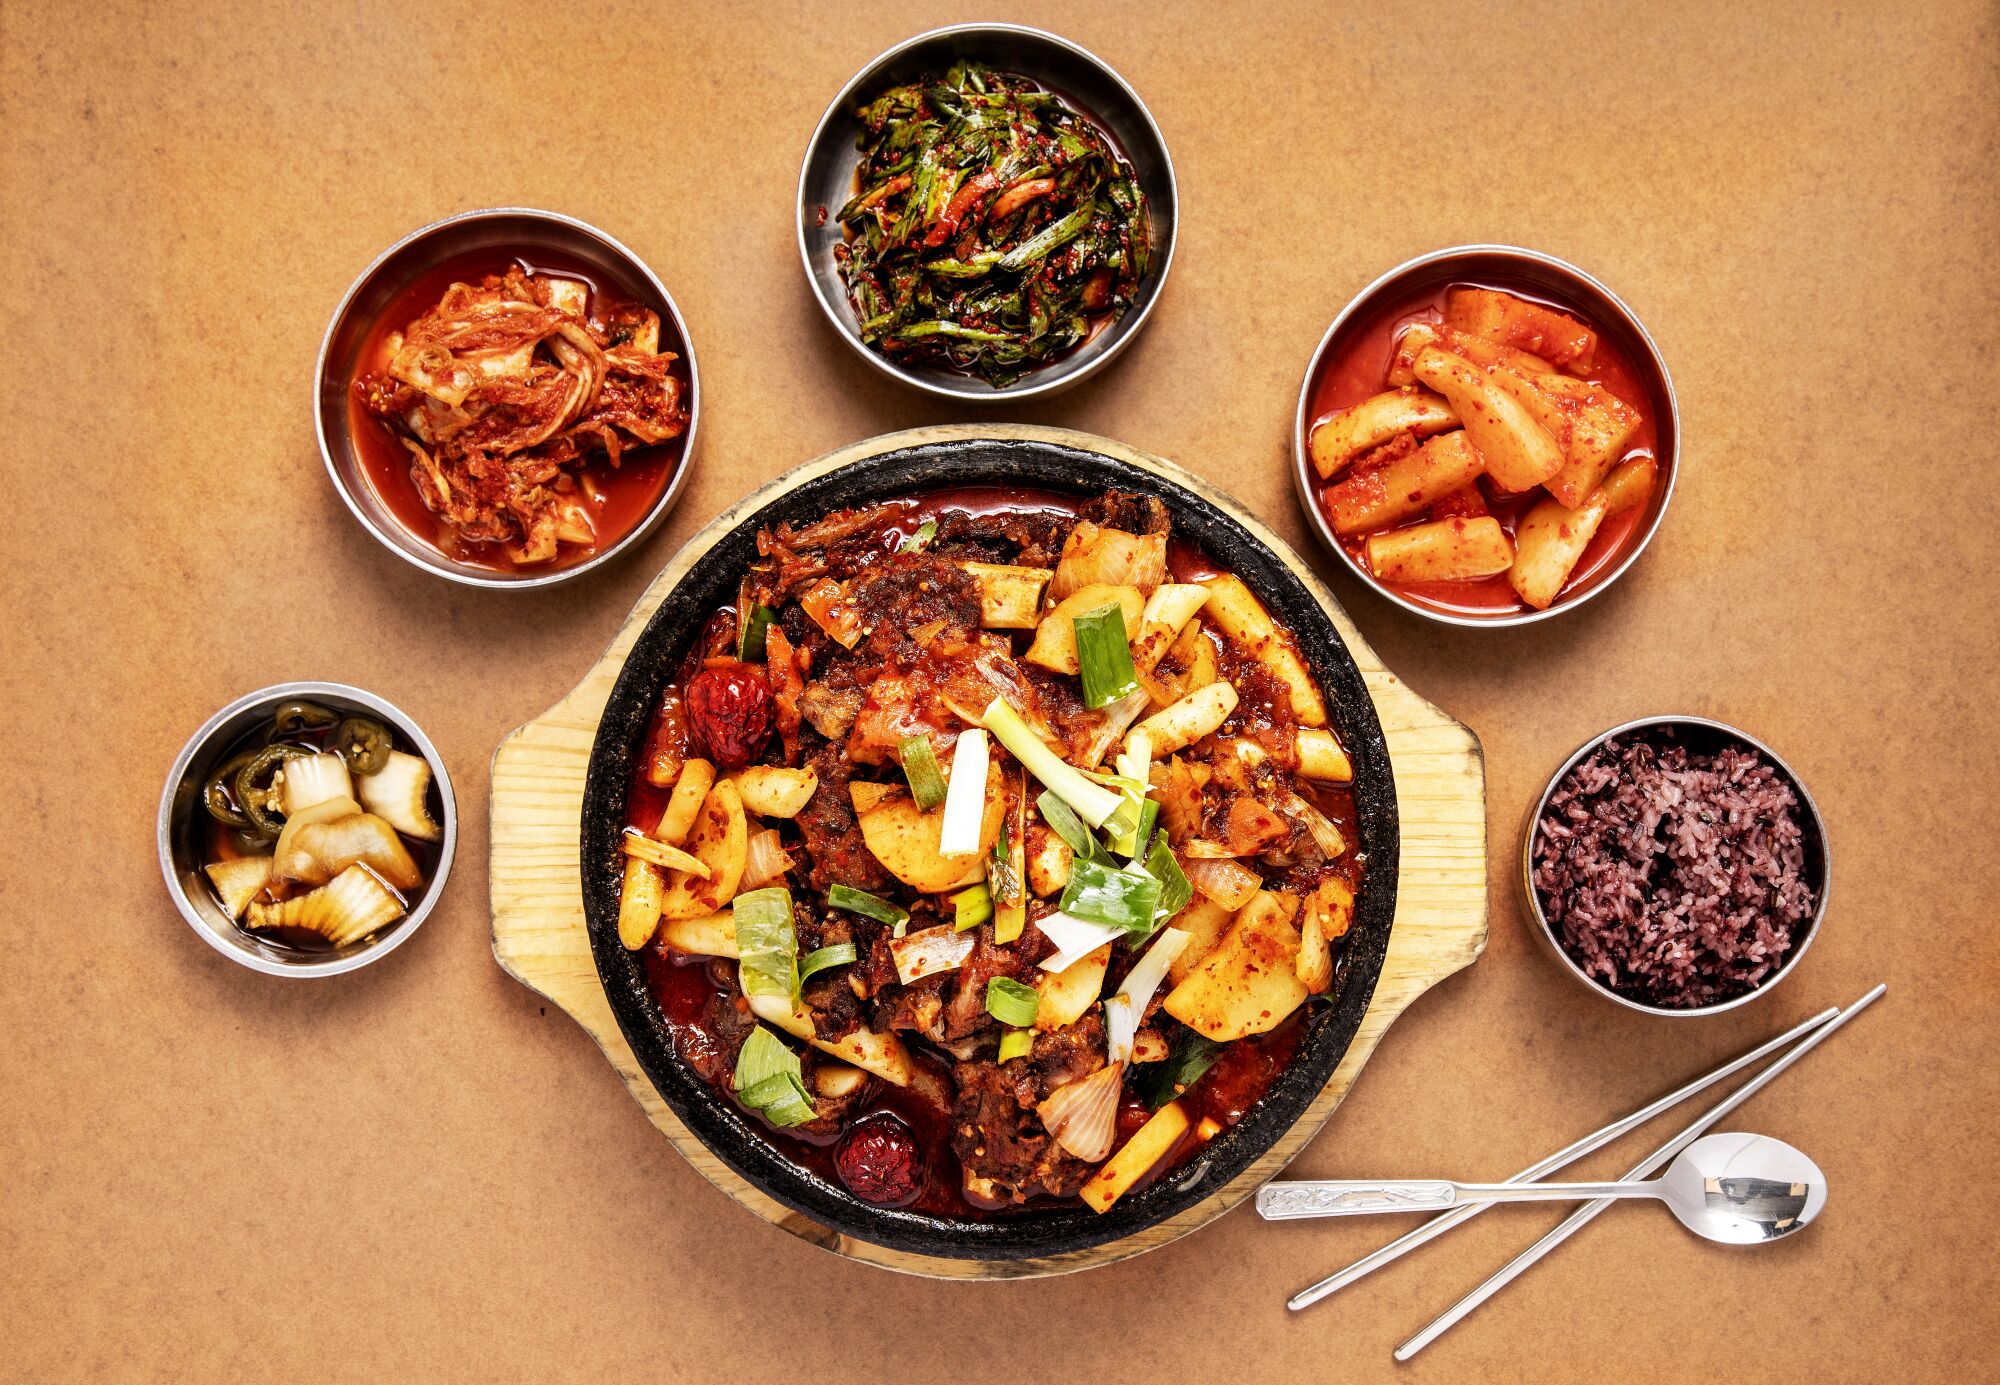 A large round dish of galbi jjim surrounded by five smaller banchan dishes.